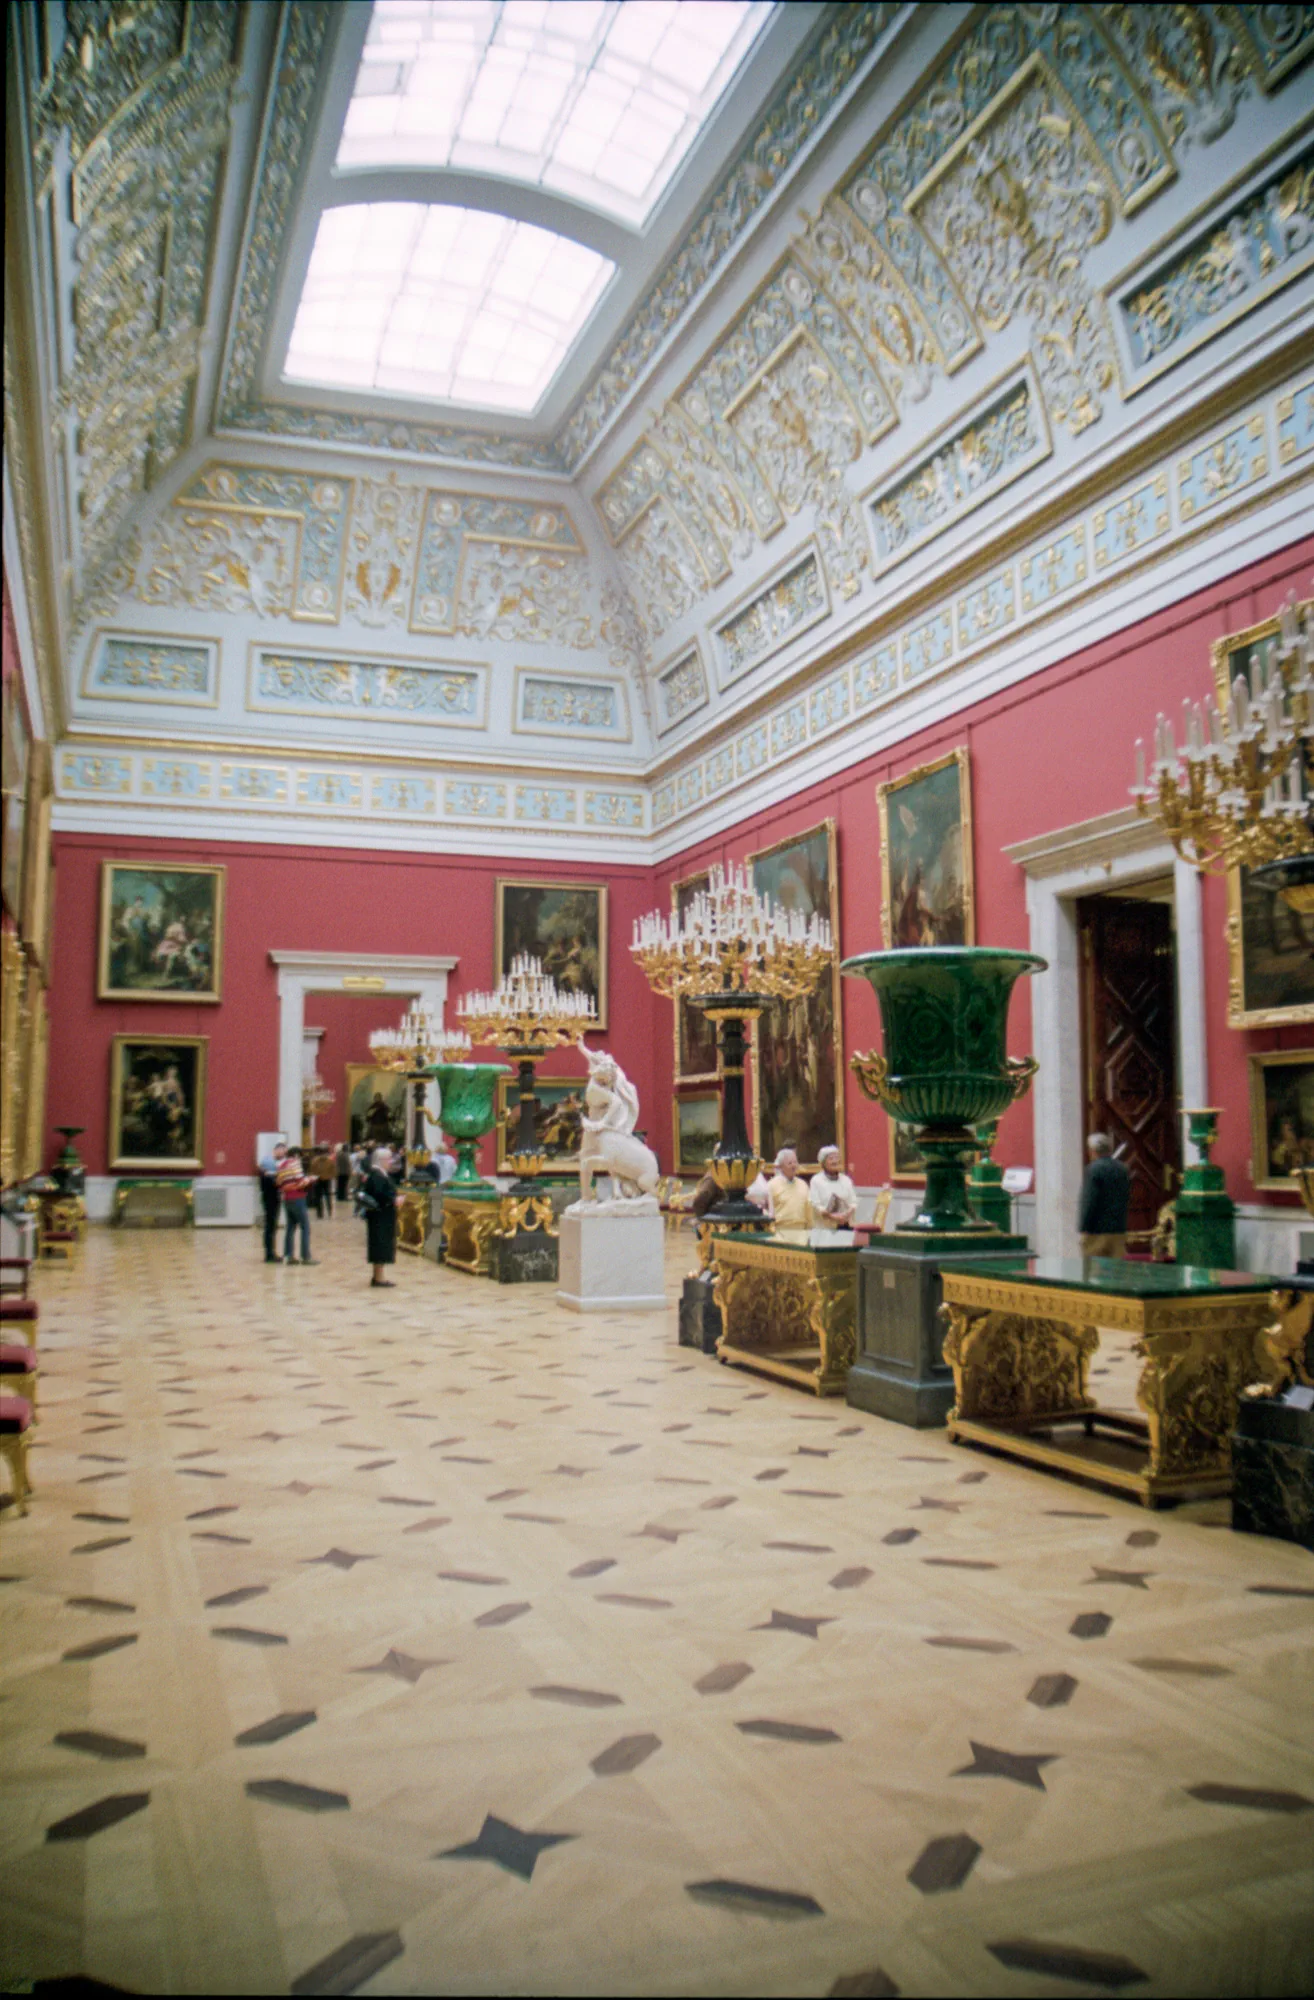 In the Hermitage